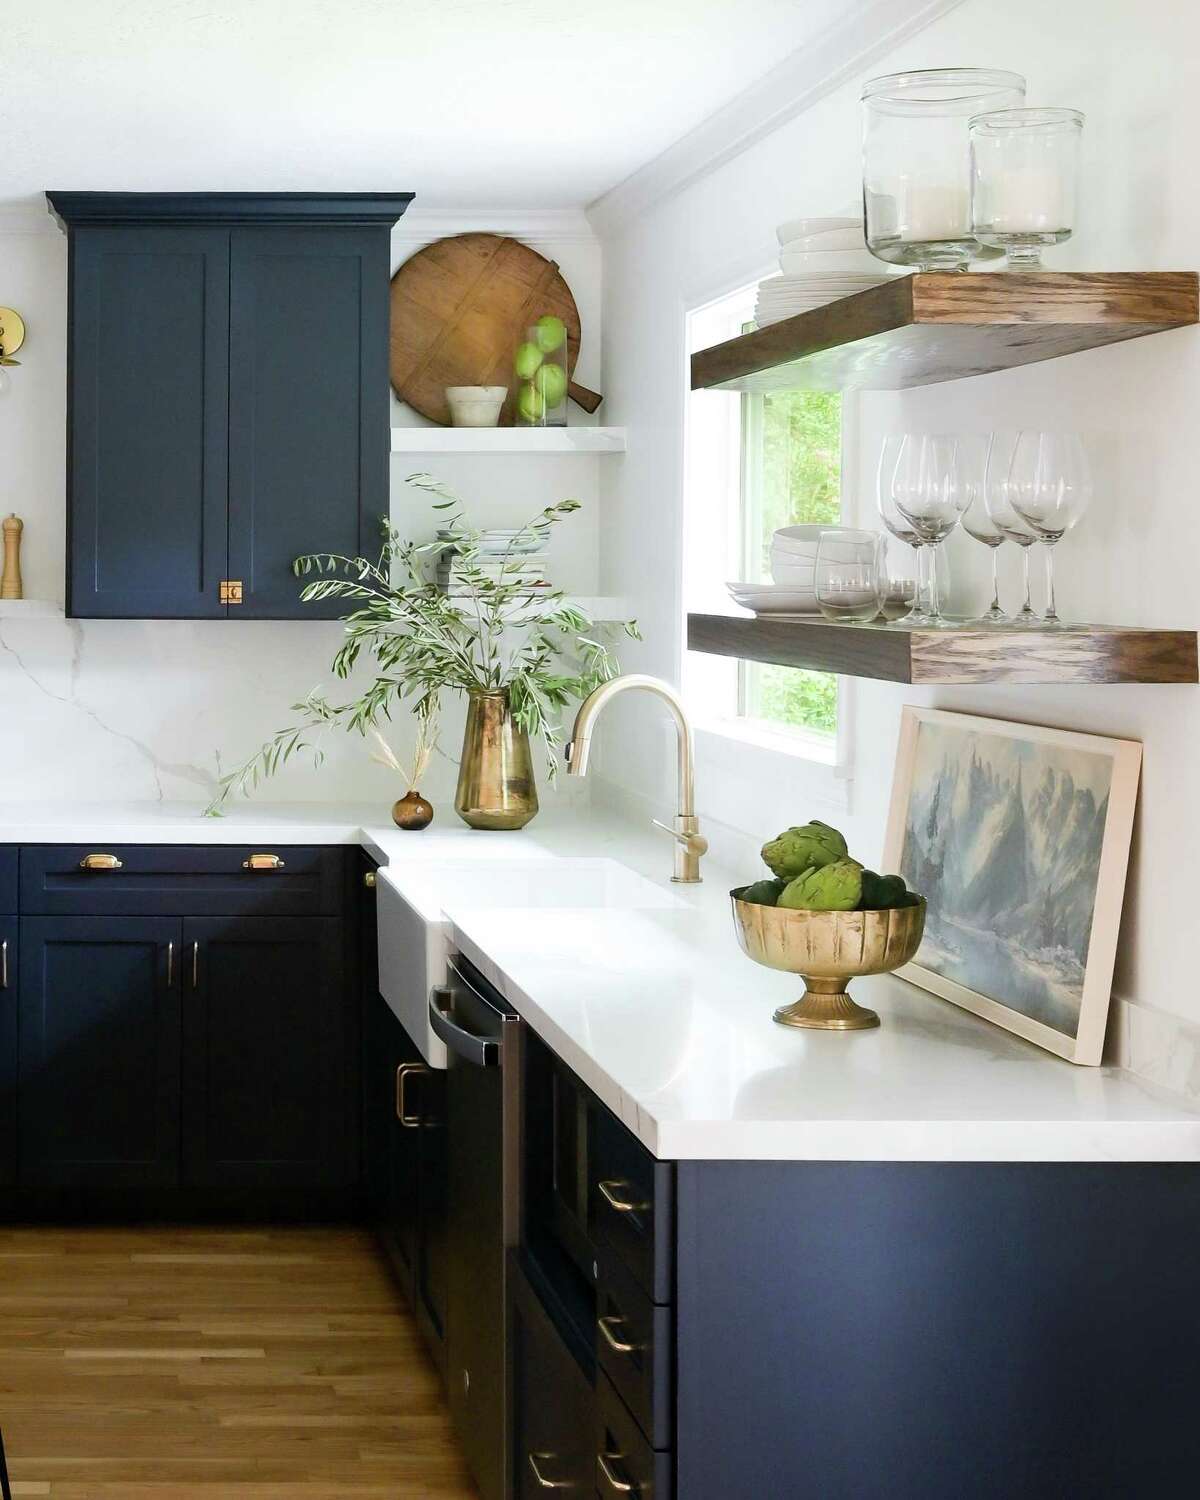 In the kitchen, the Clapps removed a peninsula and pony wall to open it up and accommodate an island. Krissy Clapp loved deeper, richer tones and chose Benjamin Moore’s Polo blue with brass hardware for the cabinets.